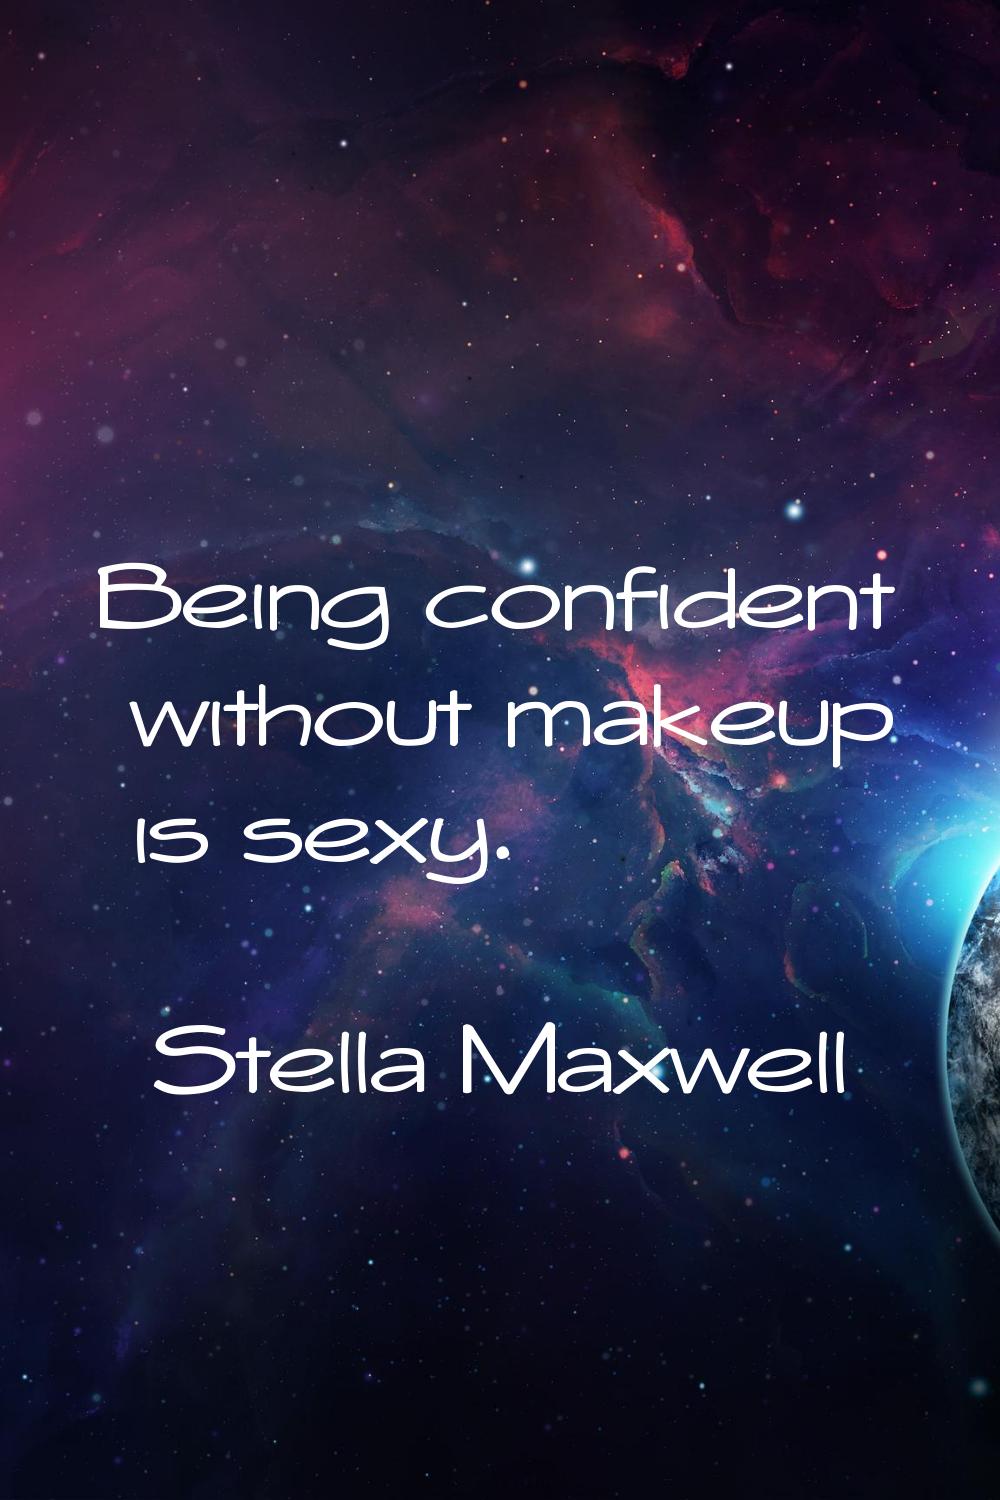 Being confident without makeup is sexy.